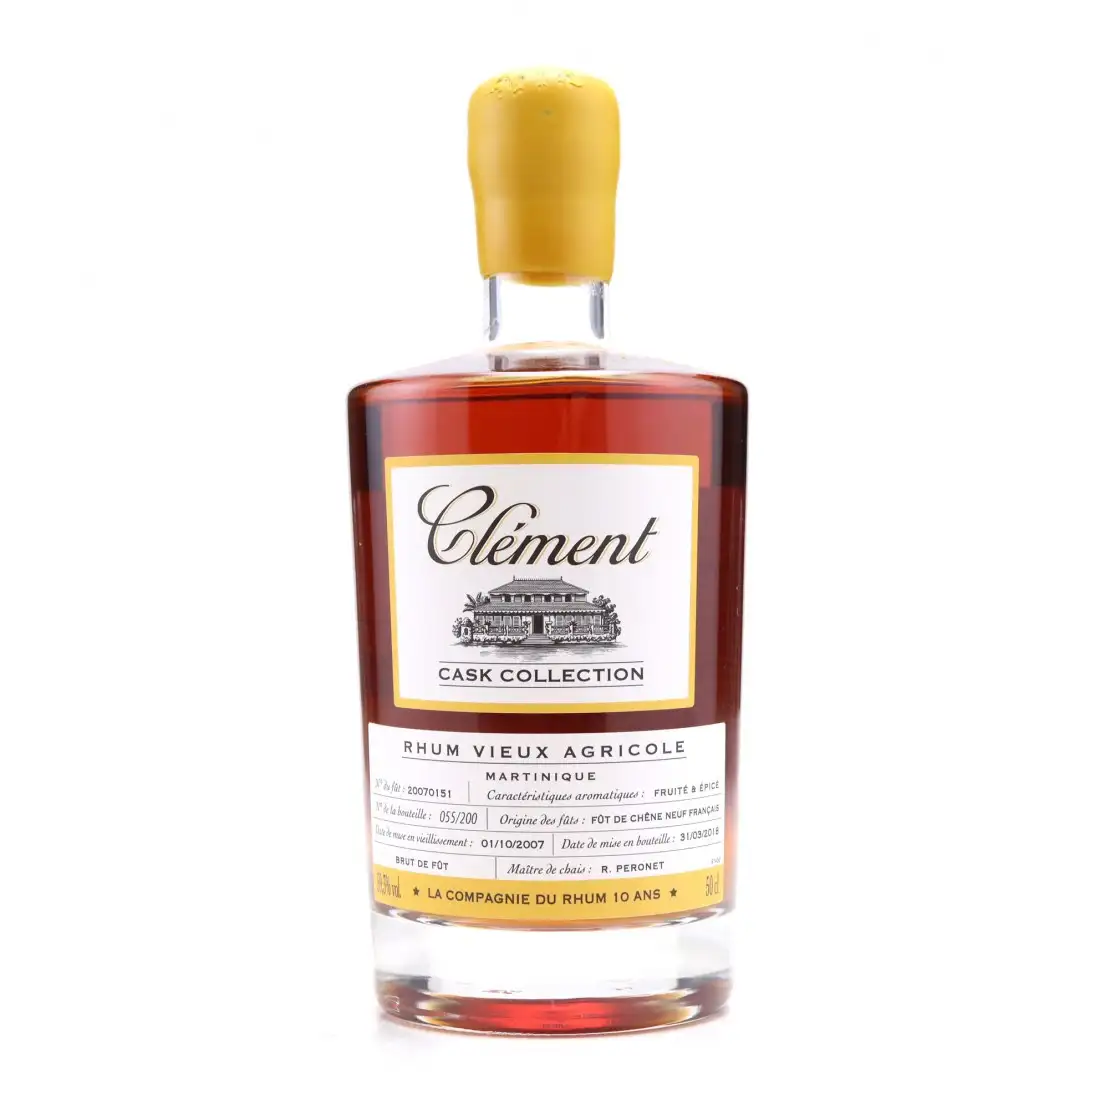 Image of the front of the bottle of the rum Clément Cask Collection